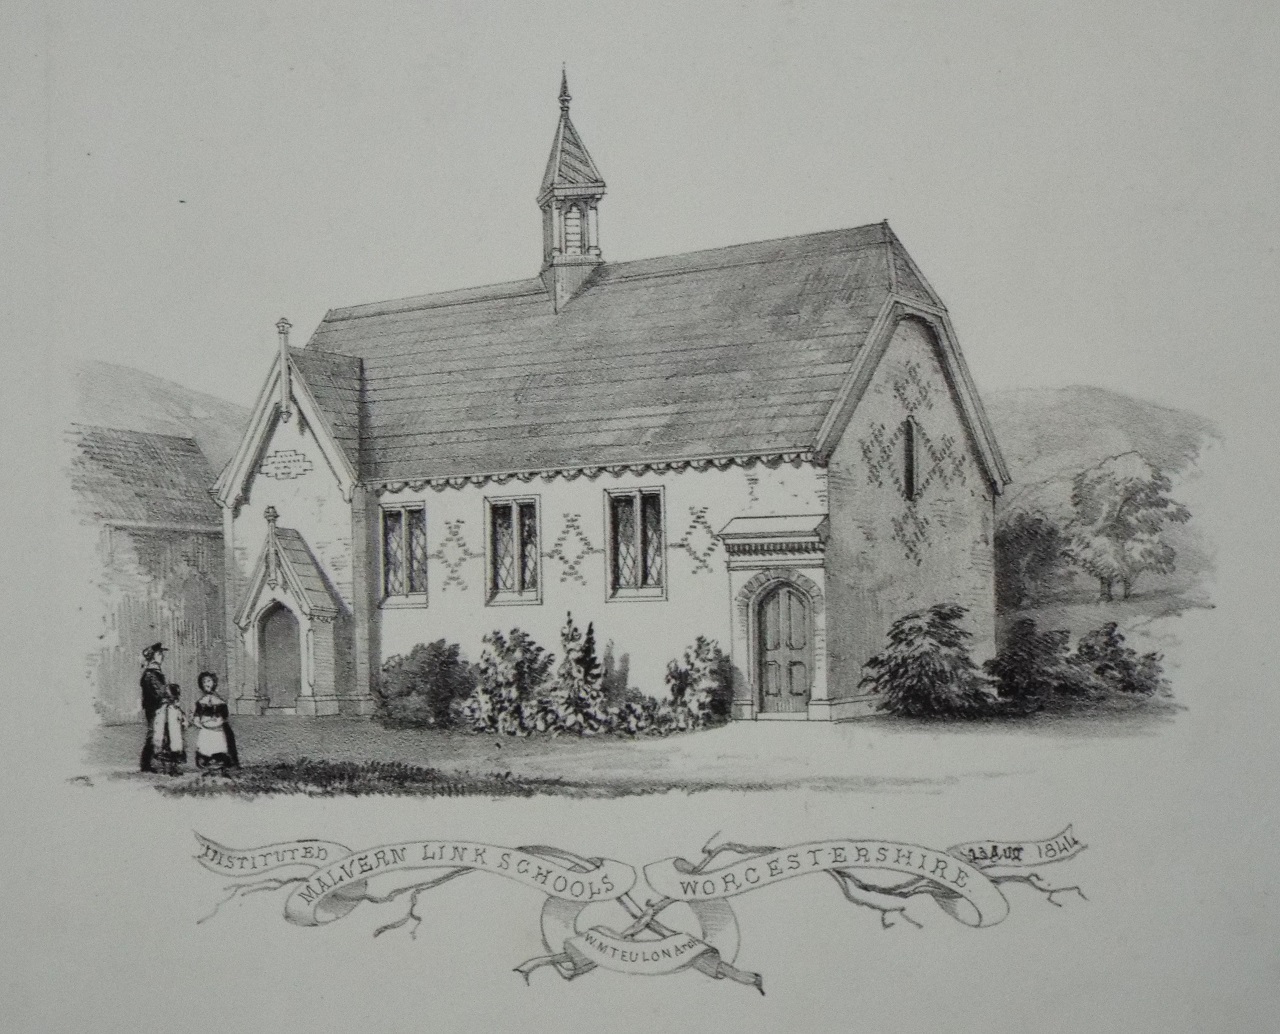 Lithograph - Instituted Malvern Link Schools Worcestershire